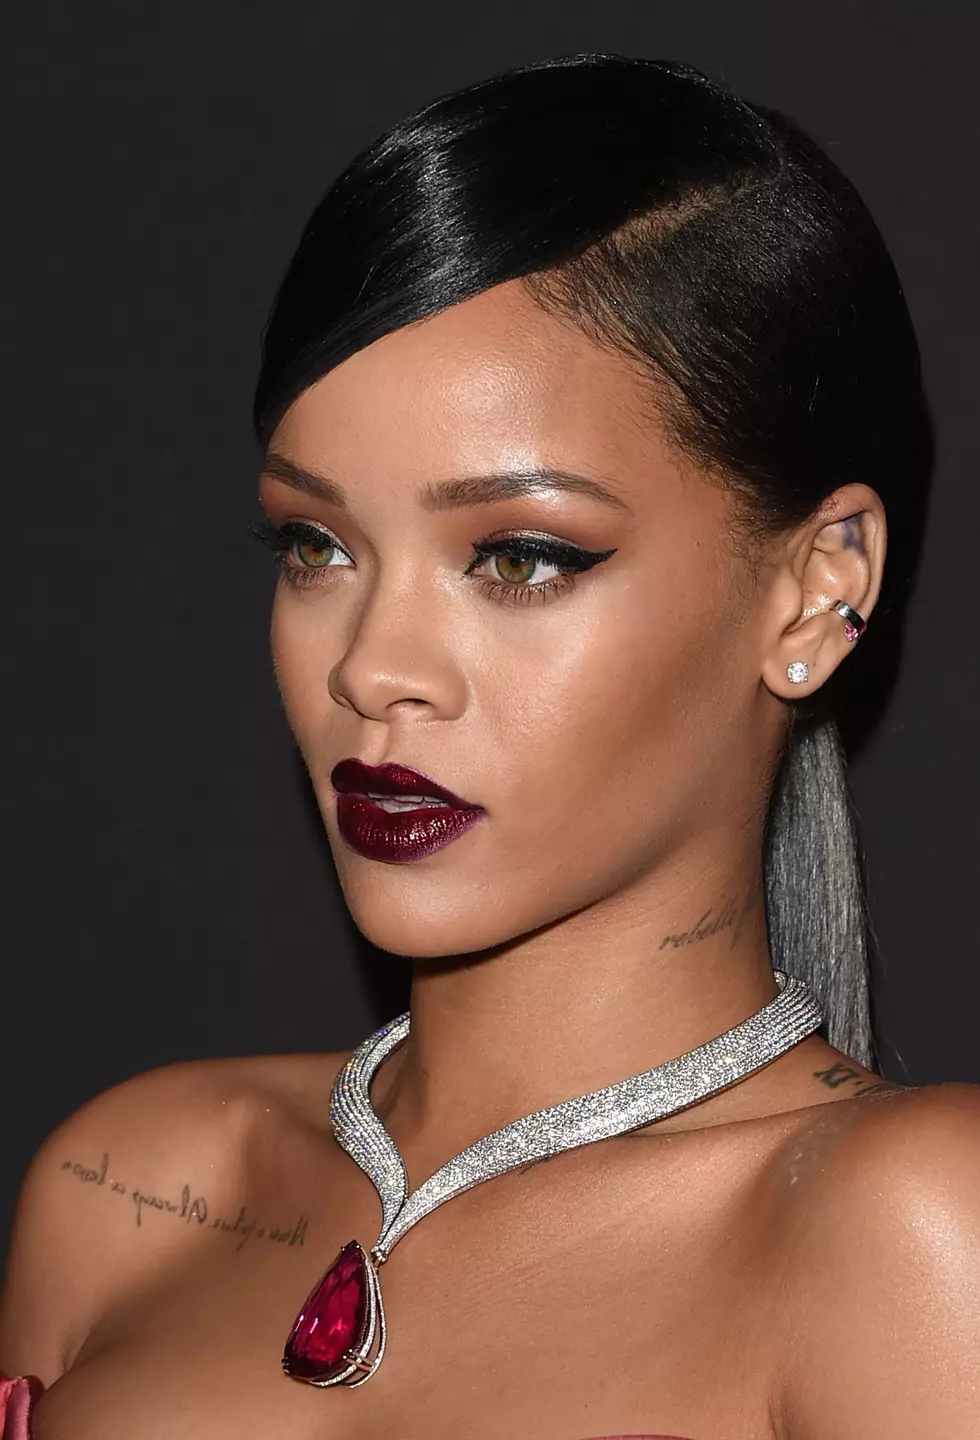 Buffalo&#8217;s Dopest Tattoos – Share Yours to Win Tickets to See Rihanna